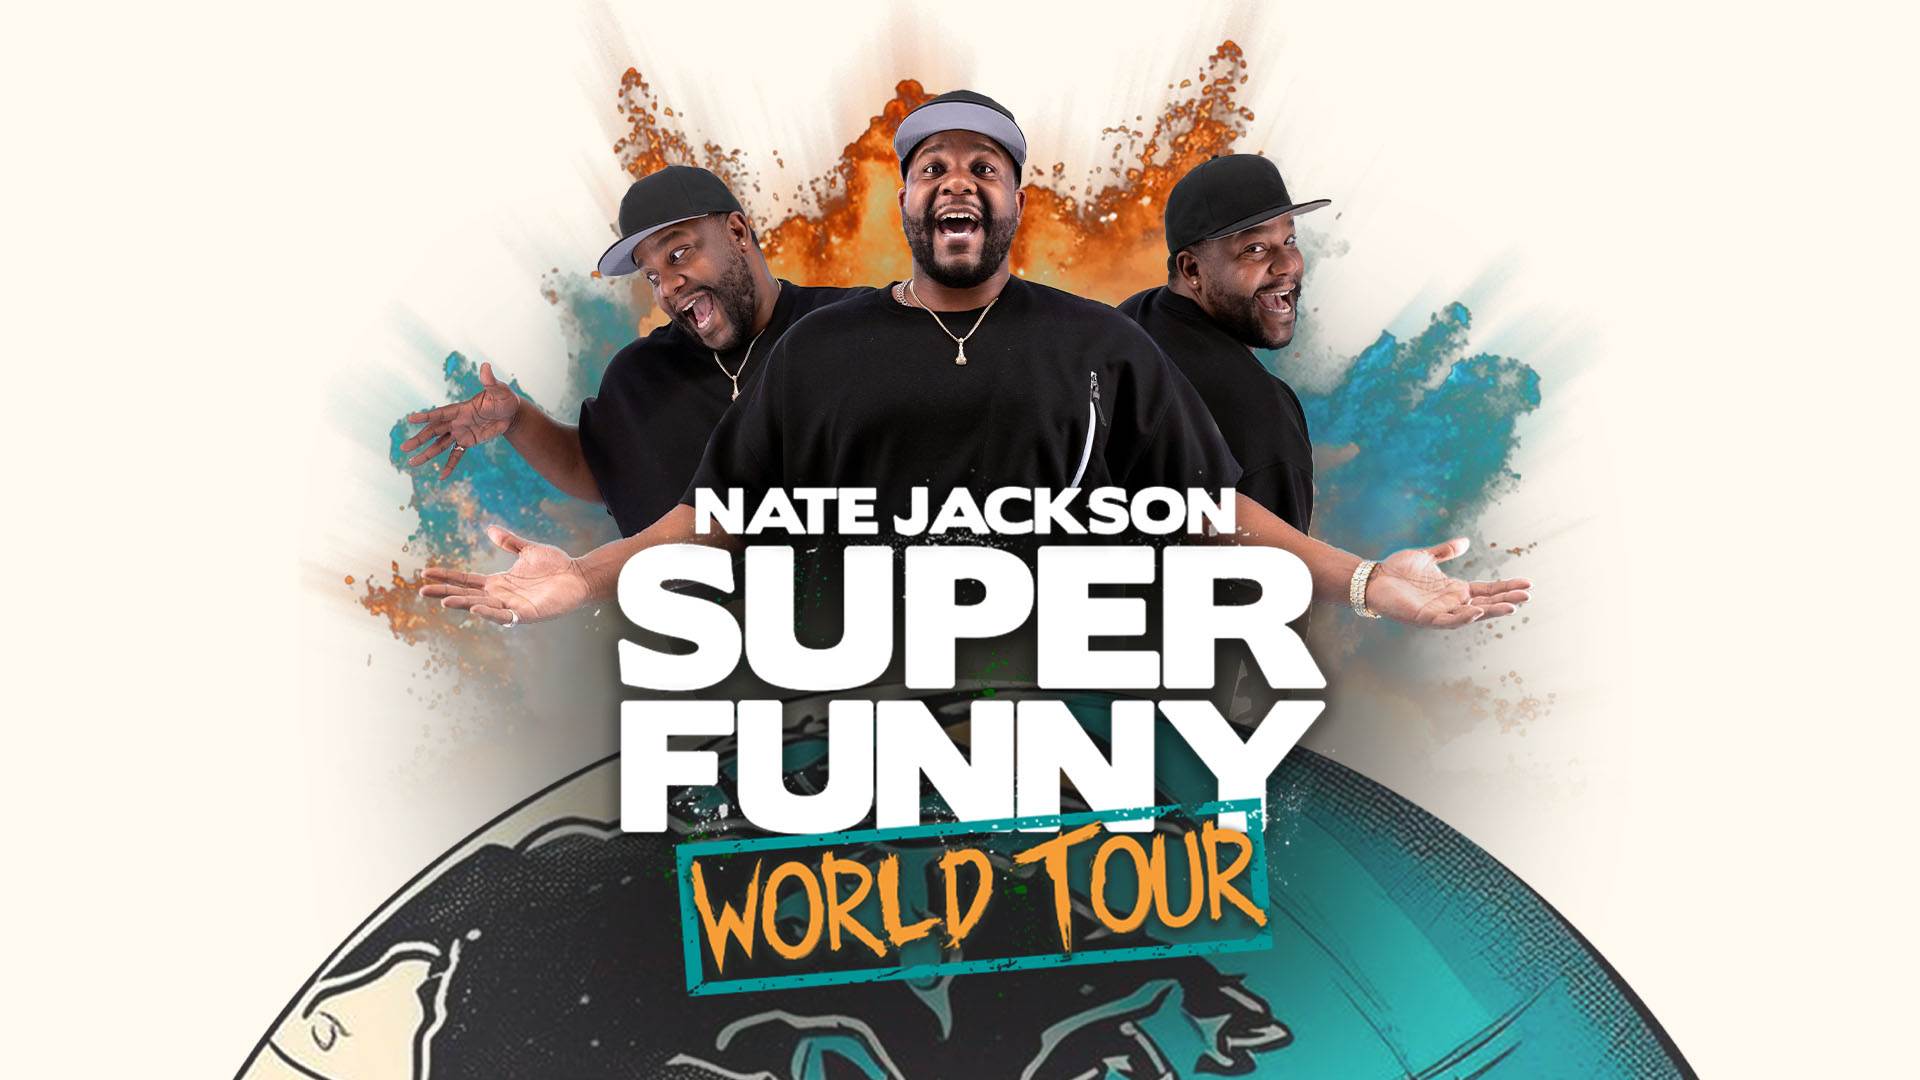 Banner reads: "Nate Jackson - Super Funny World Tour." A digital rendering of Nate, a black man with a short beard in a black t-shirt, silver chain and black baseball cap, in three positions, the center one has his mouth open and both arms spread wide. The other two "Nates" lean out from either side of him. An illustration of the earth is placed below them with text in front.